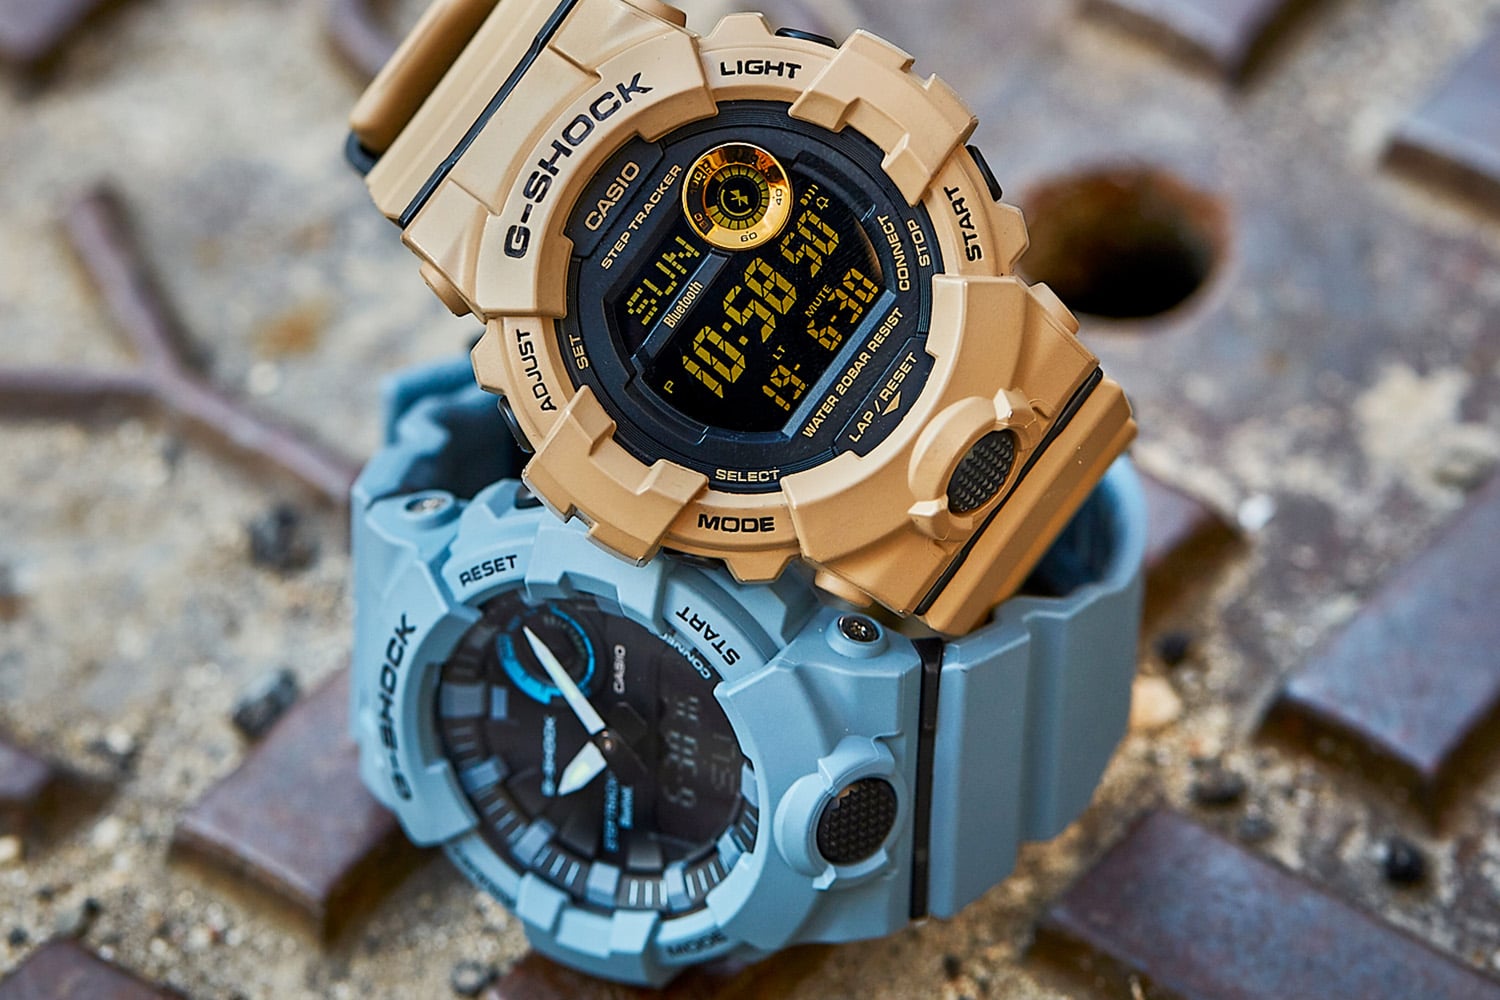 G-SHOCK's Most Advanced Fitness Watch to Date - The GBD800UC | Man of Many